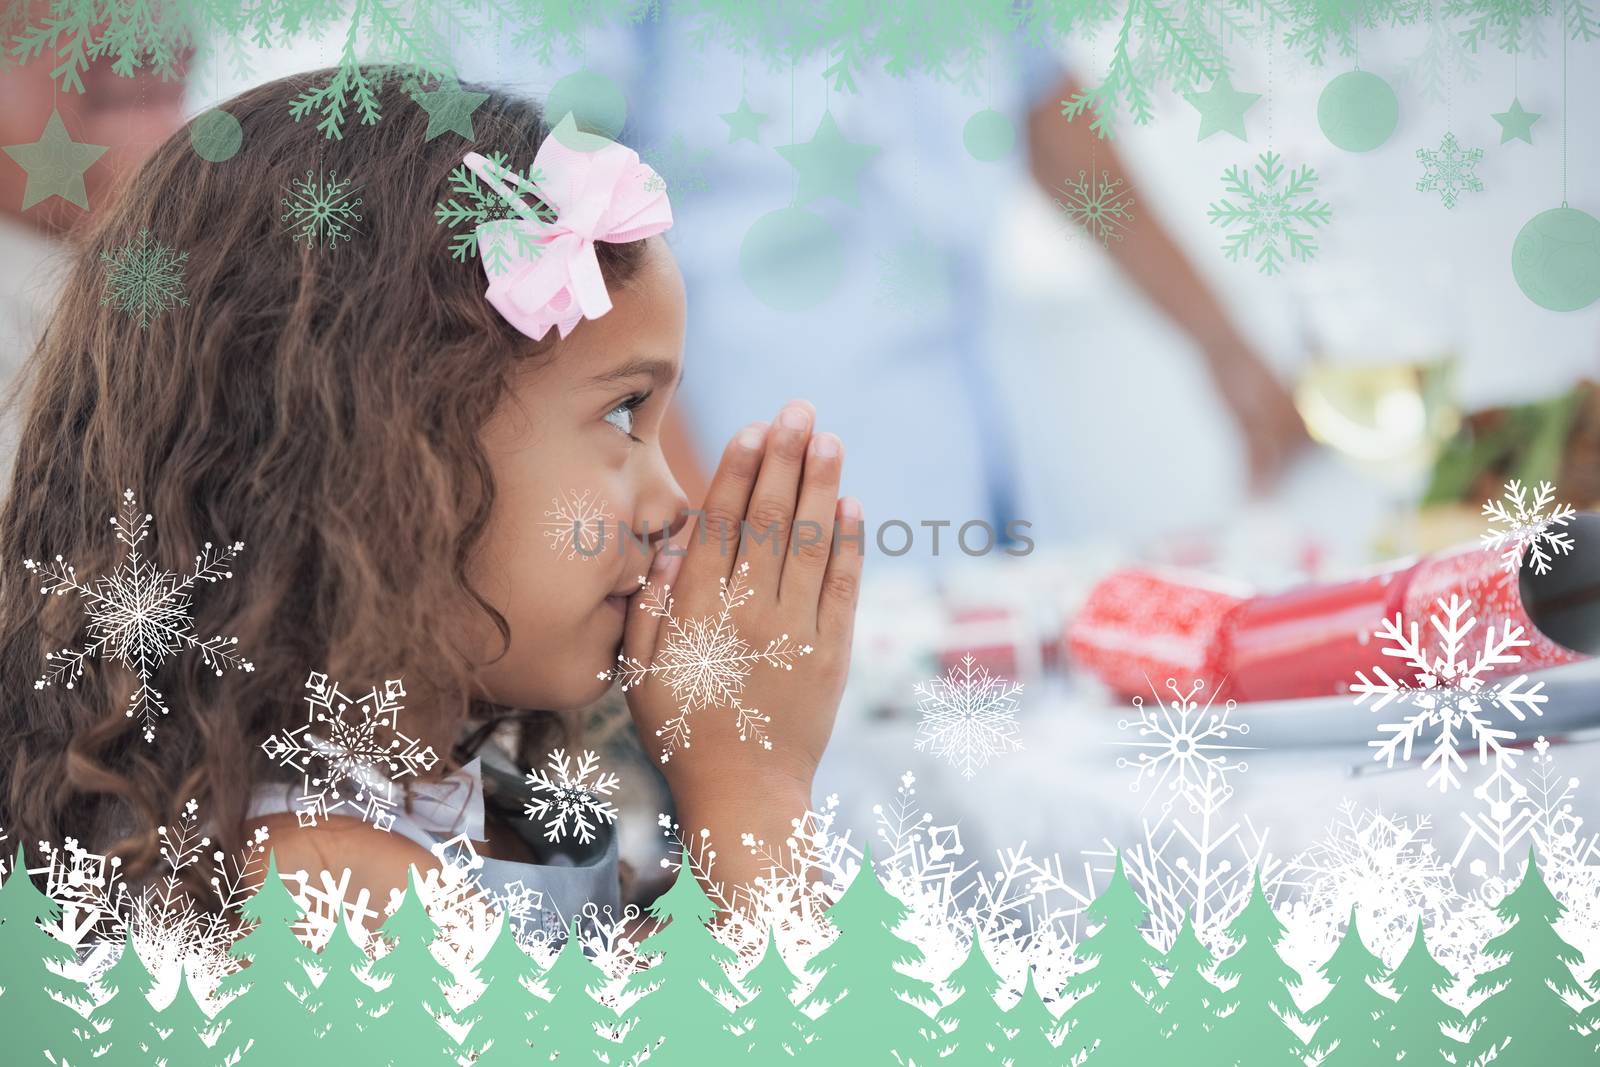 Little girl sitting praying at table against snowflakes and fir trees in green